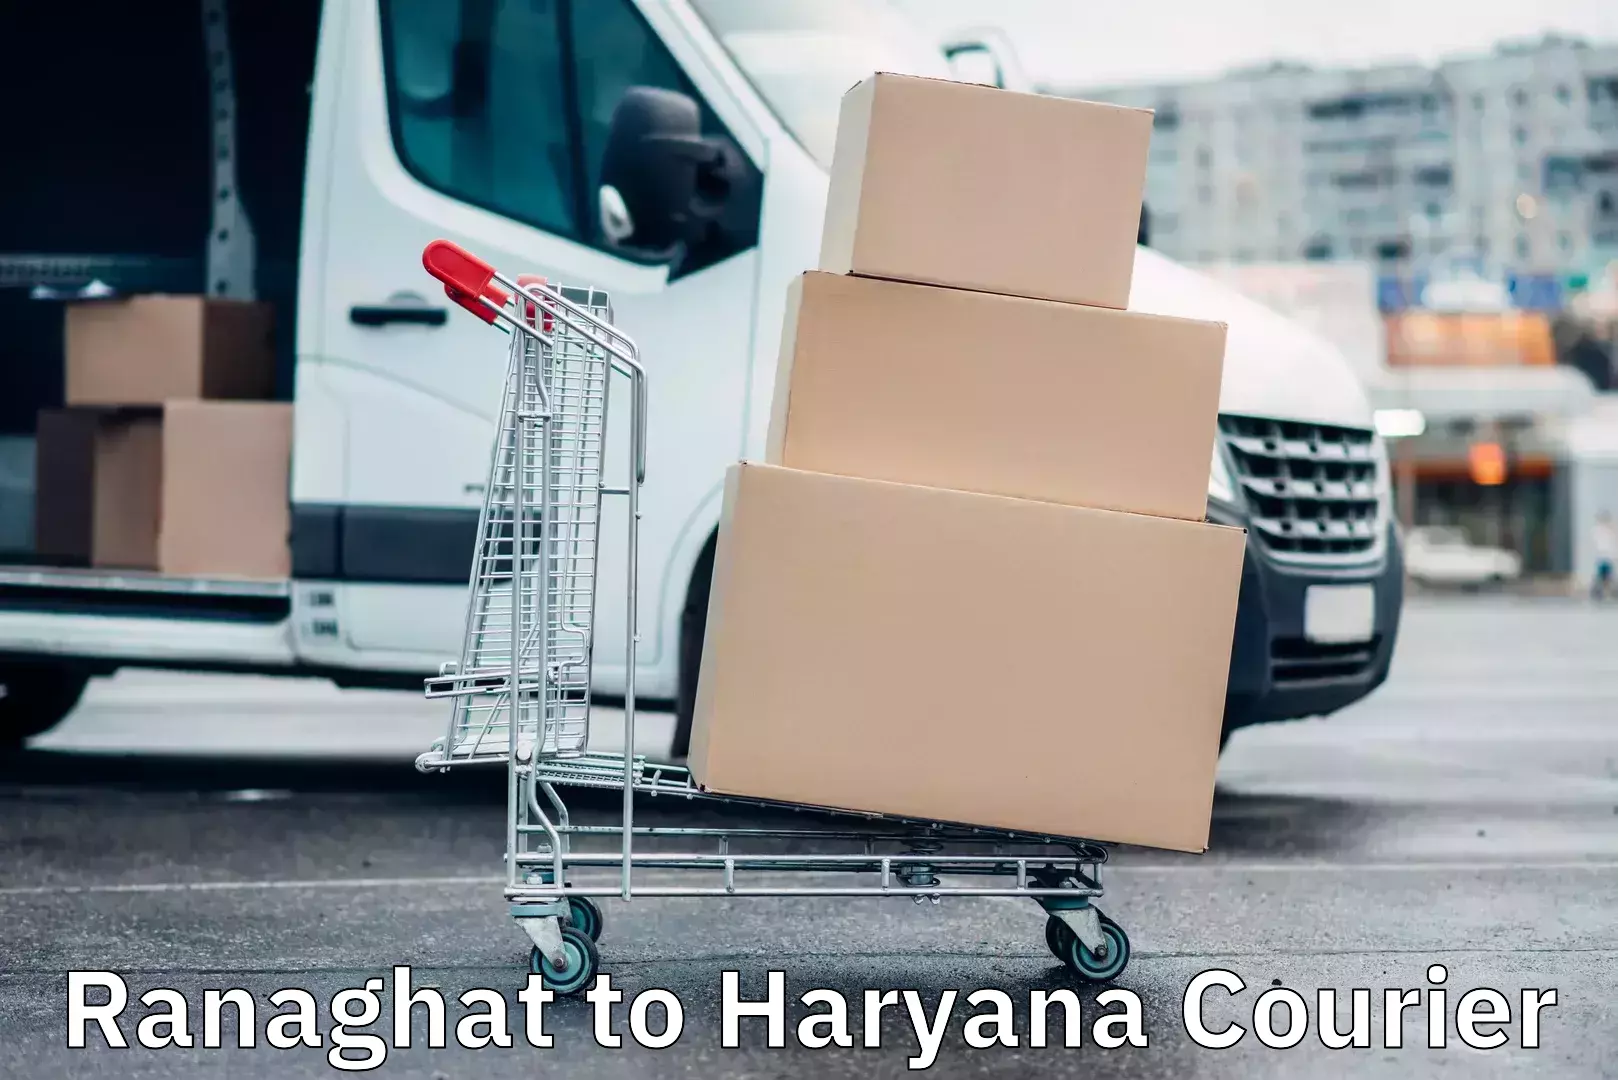 Bulk courier orders Ranaghat to Haryana